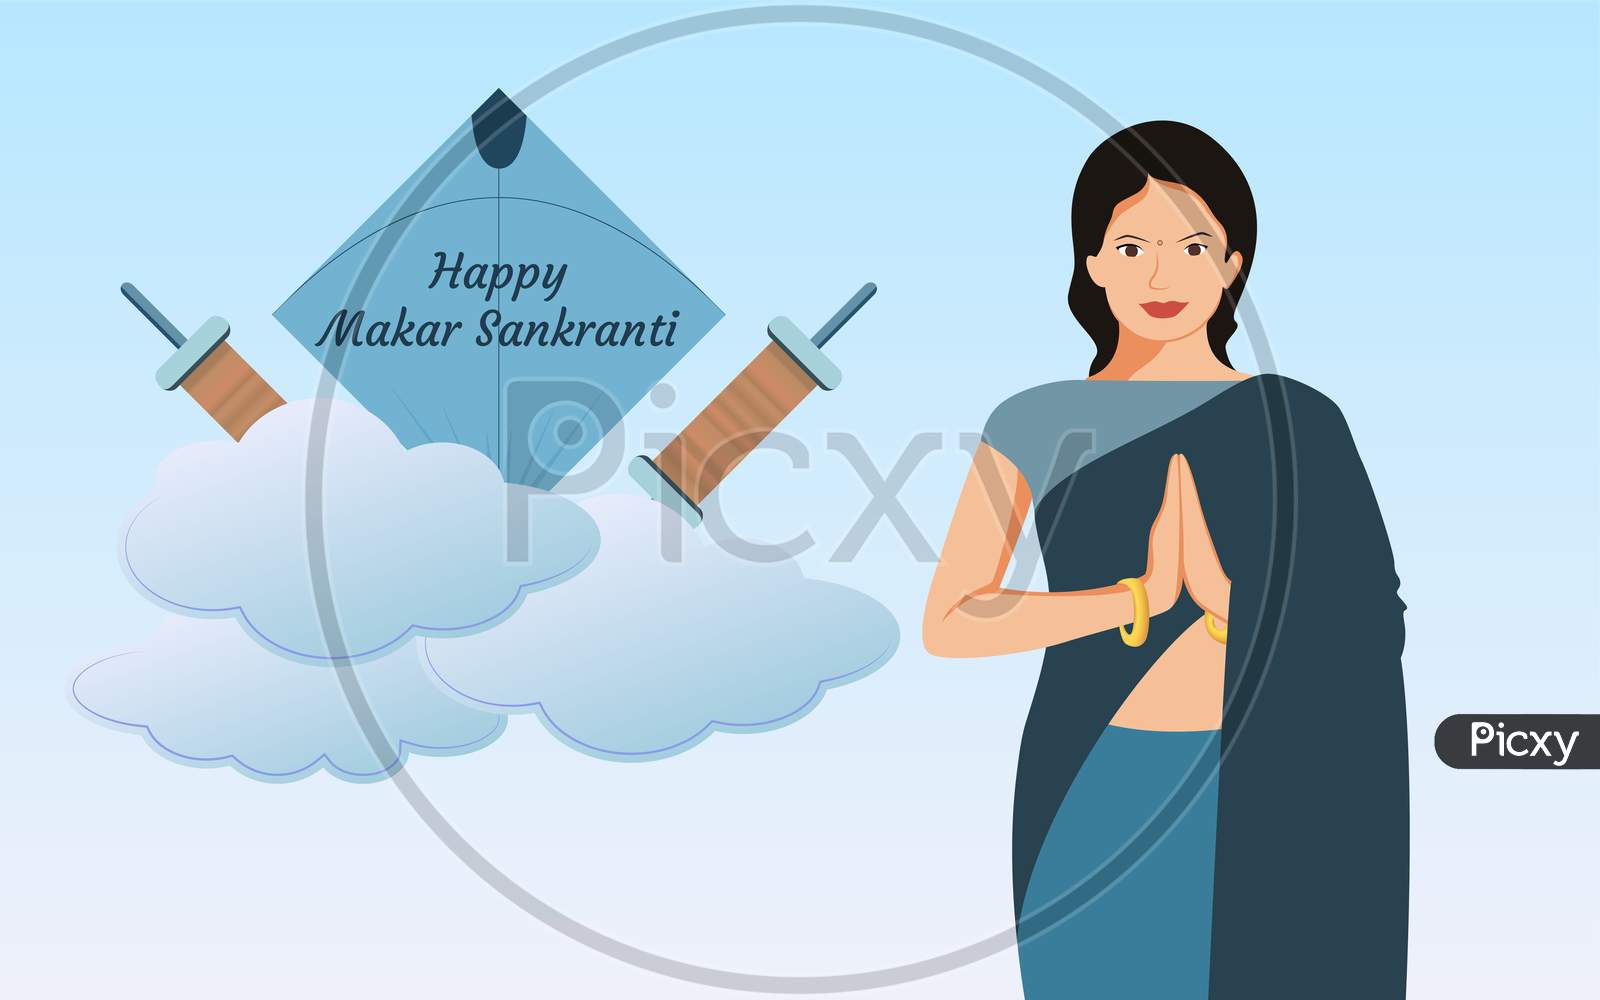 Girl In Namaste Pose On Blue Background With Clouds, Charkhi And Kite, Happy Makar Sankranti Vector Illustration.